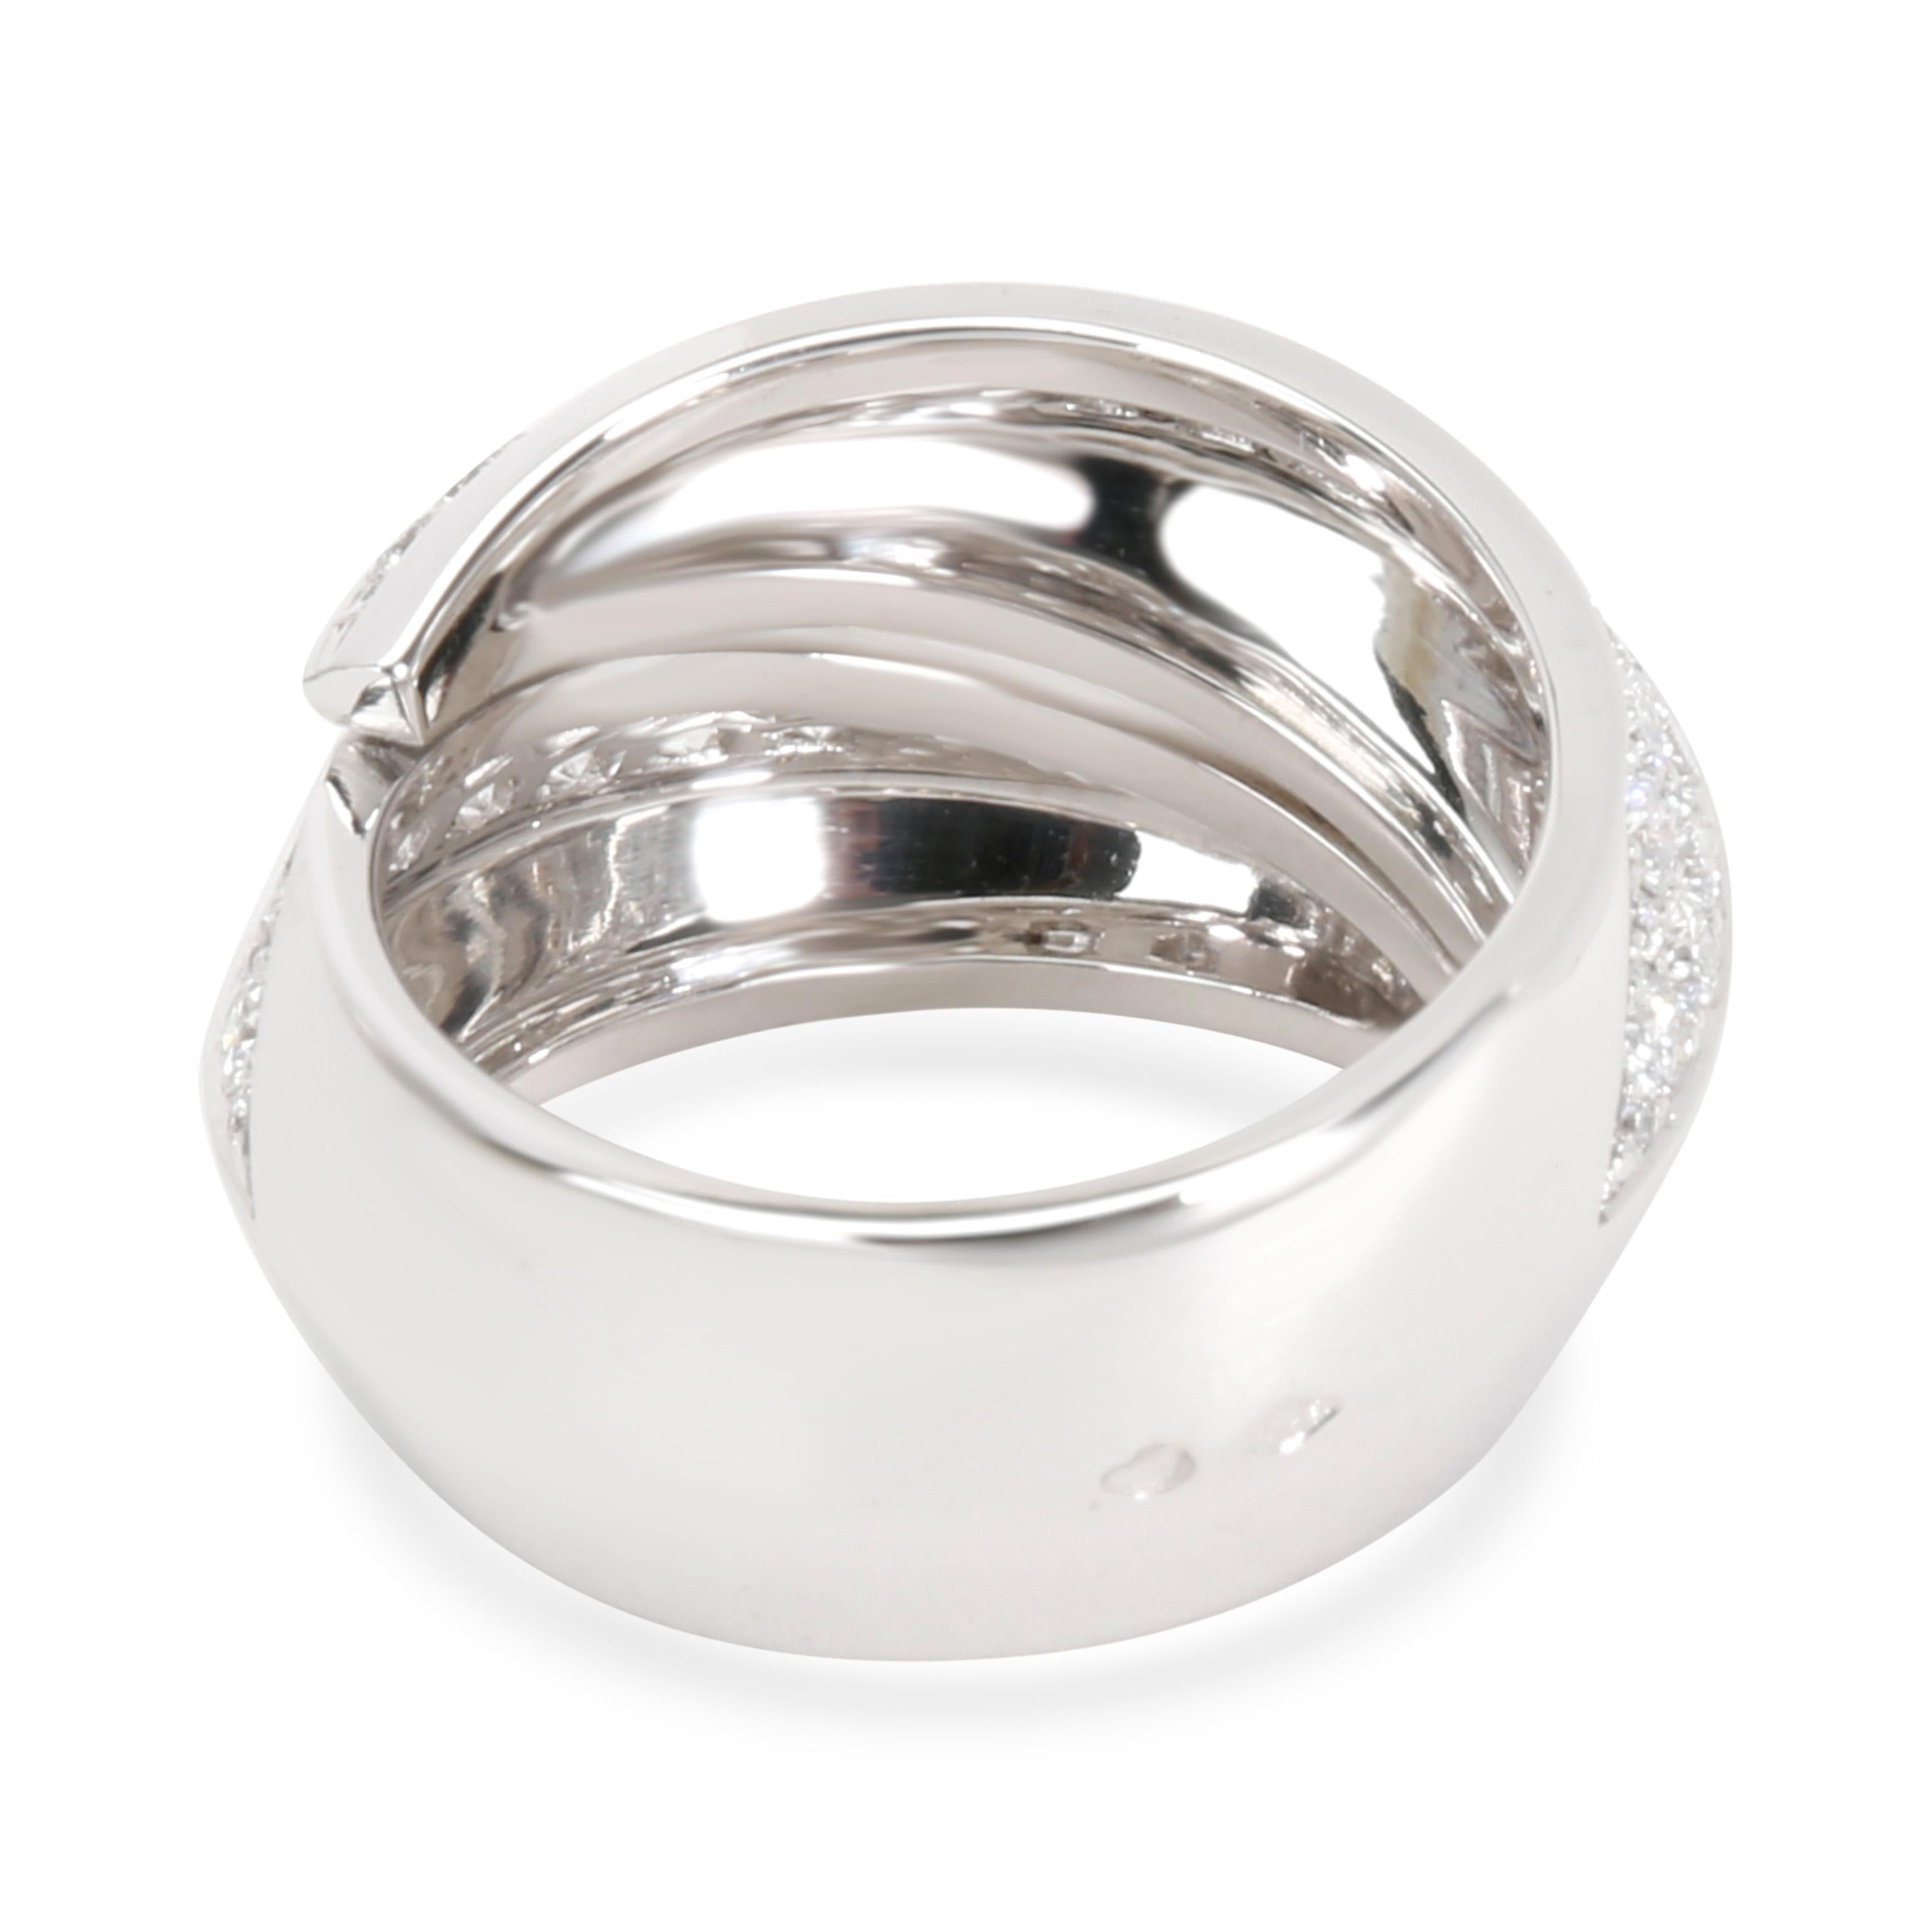 
Cartier Panthere Griffe Ring in 18KT White Gold 1.70 ctw

PRIMARY DETAILS
SKU: 091710
Listing Title: Cartier Panthere Griffe Ring in 18KT White Gold 1.70 ctw
Condition Description: In excellent condition and recently polished. Comes with original